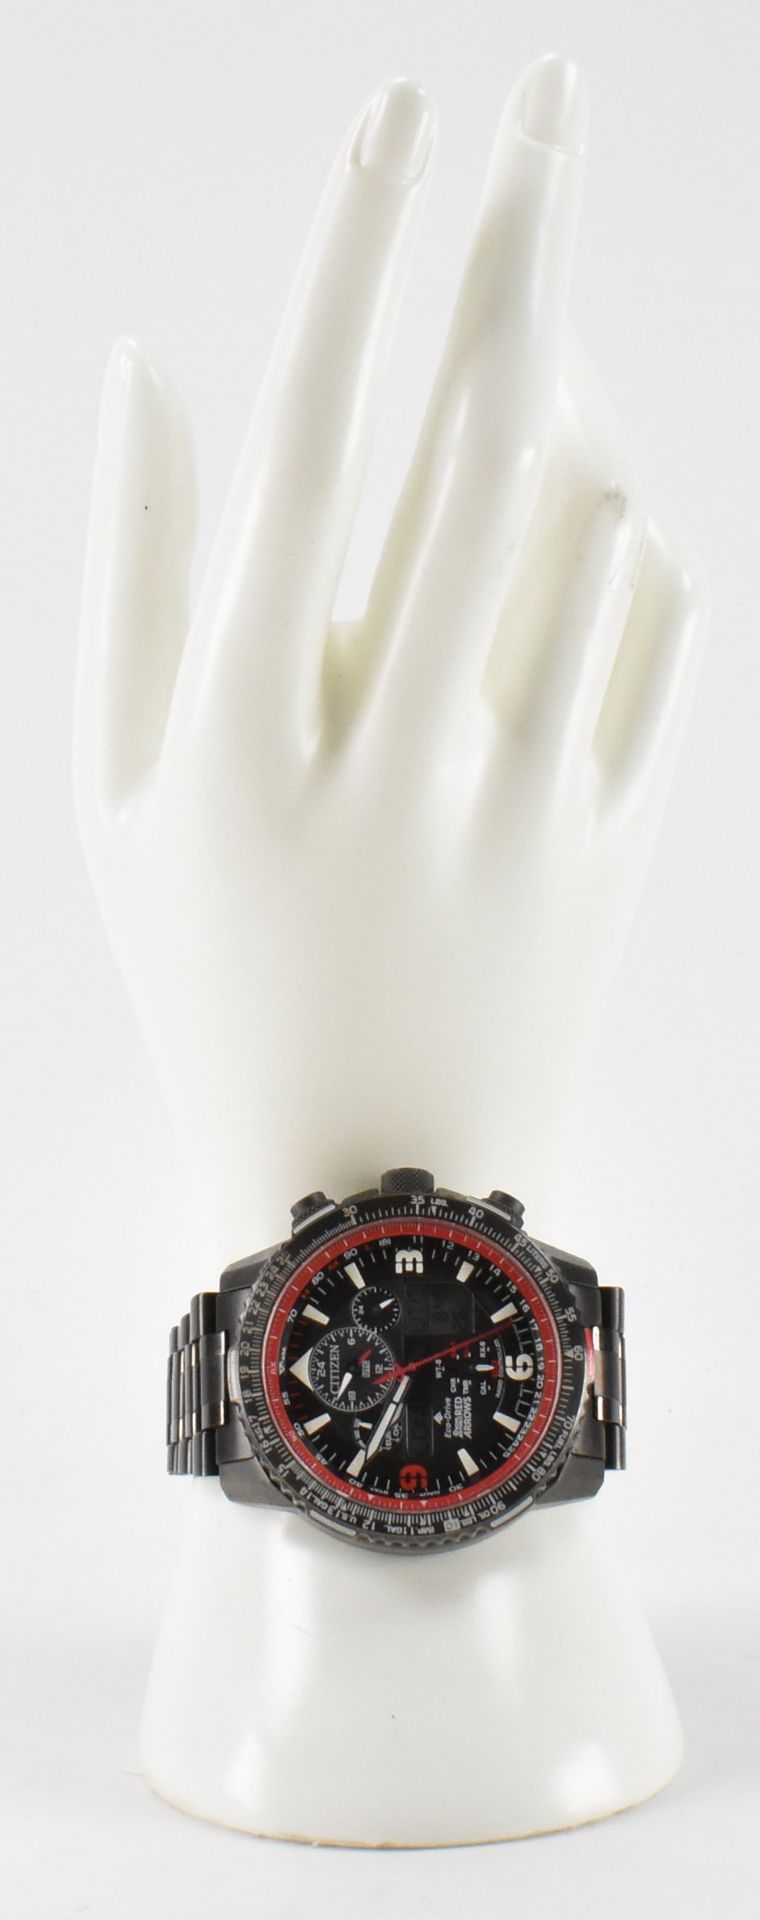 CITIZEN ECO DRIVE LIMITED EDITION RED ARROWS WRISTWATCH - Image 8 of 8